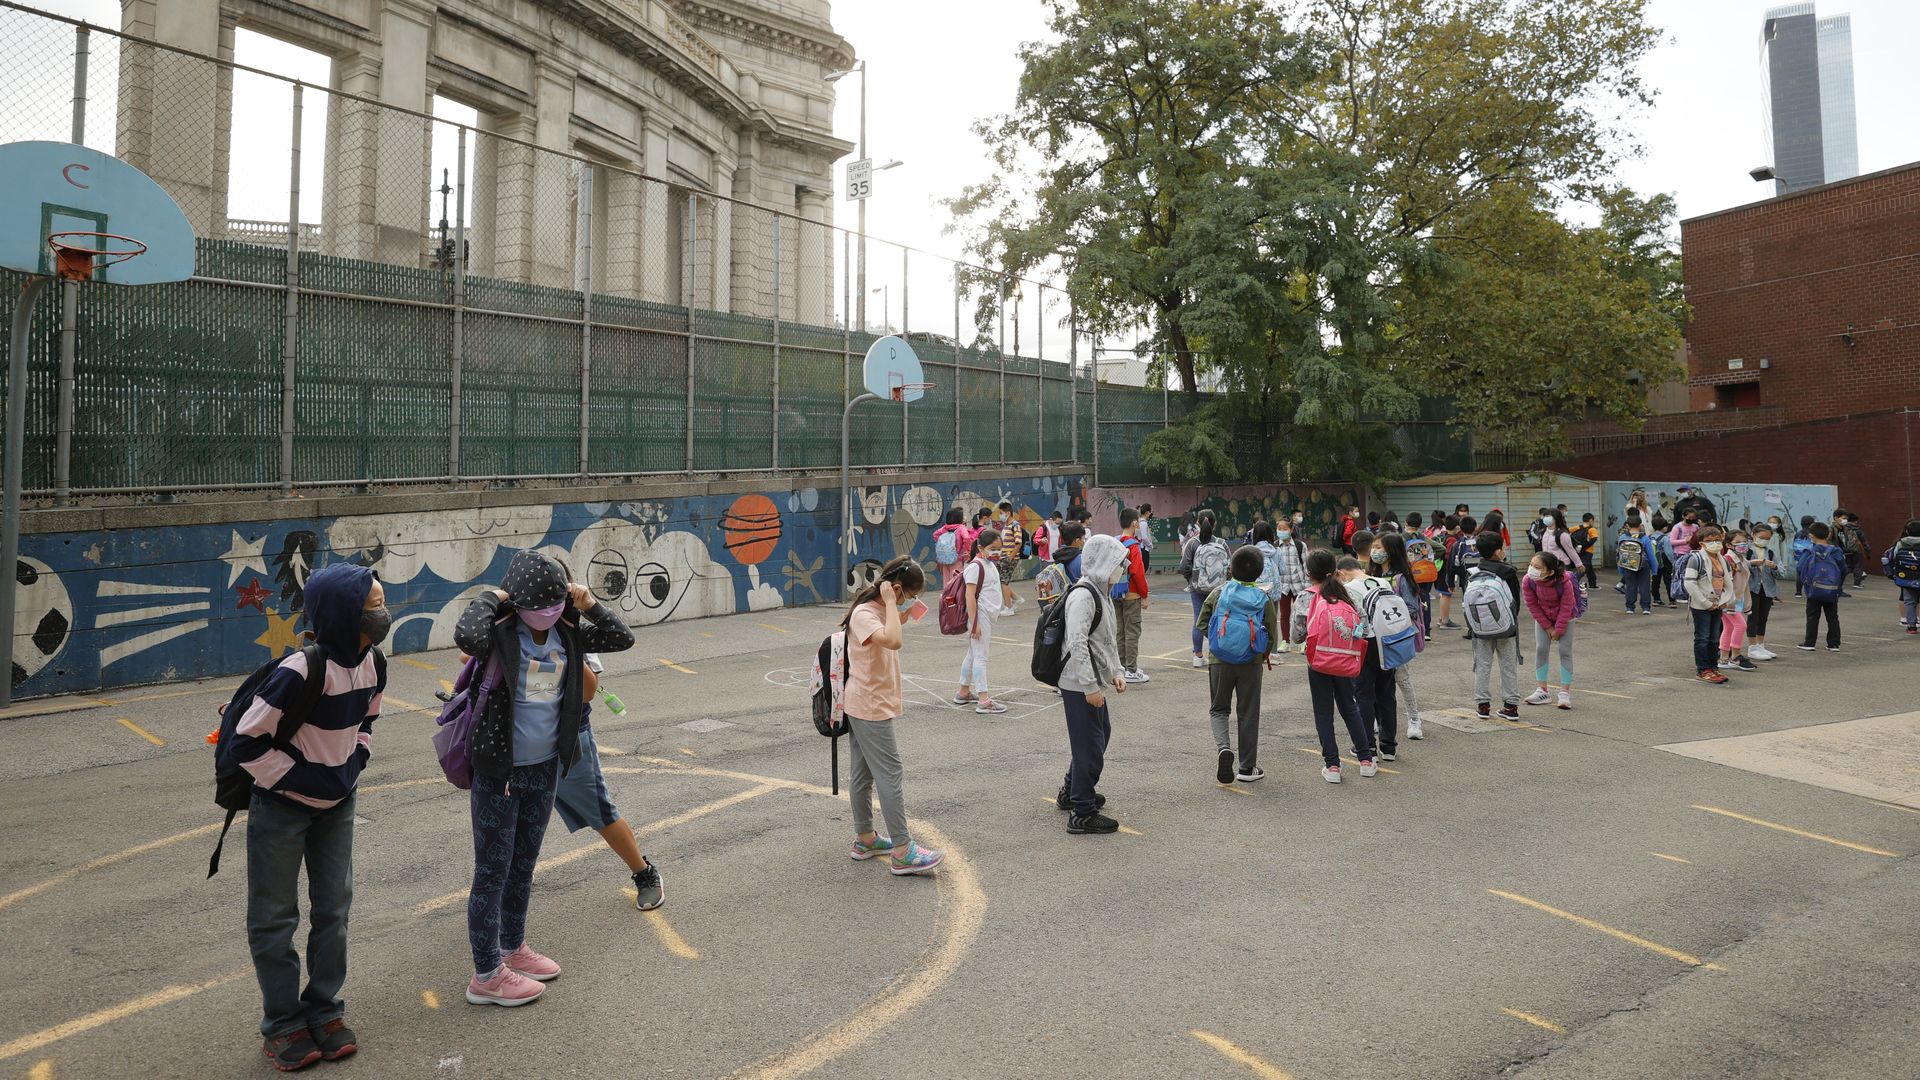 Students line up in the morning at Yung Wing School P.S. 124 on September 27, 2021 in New York City.